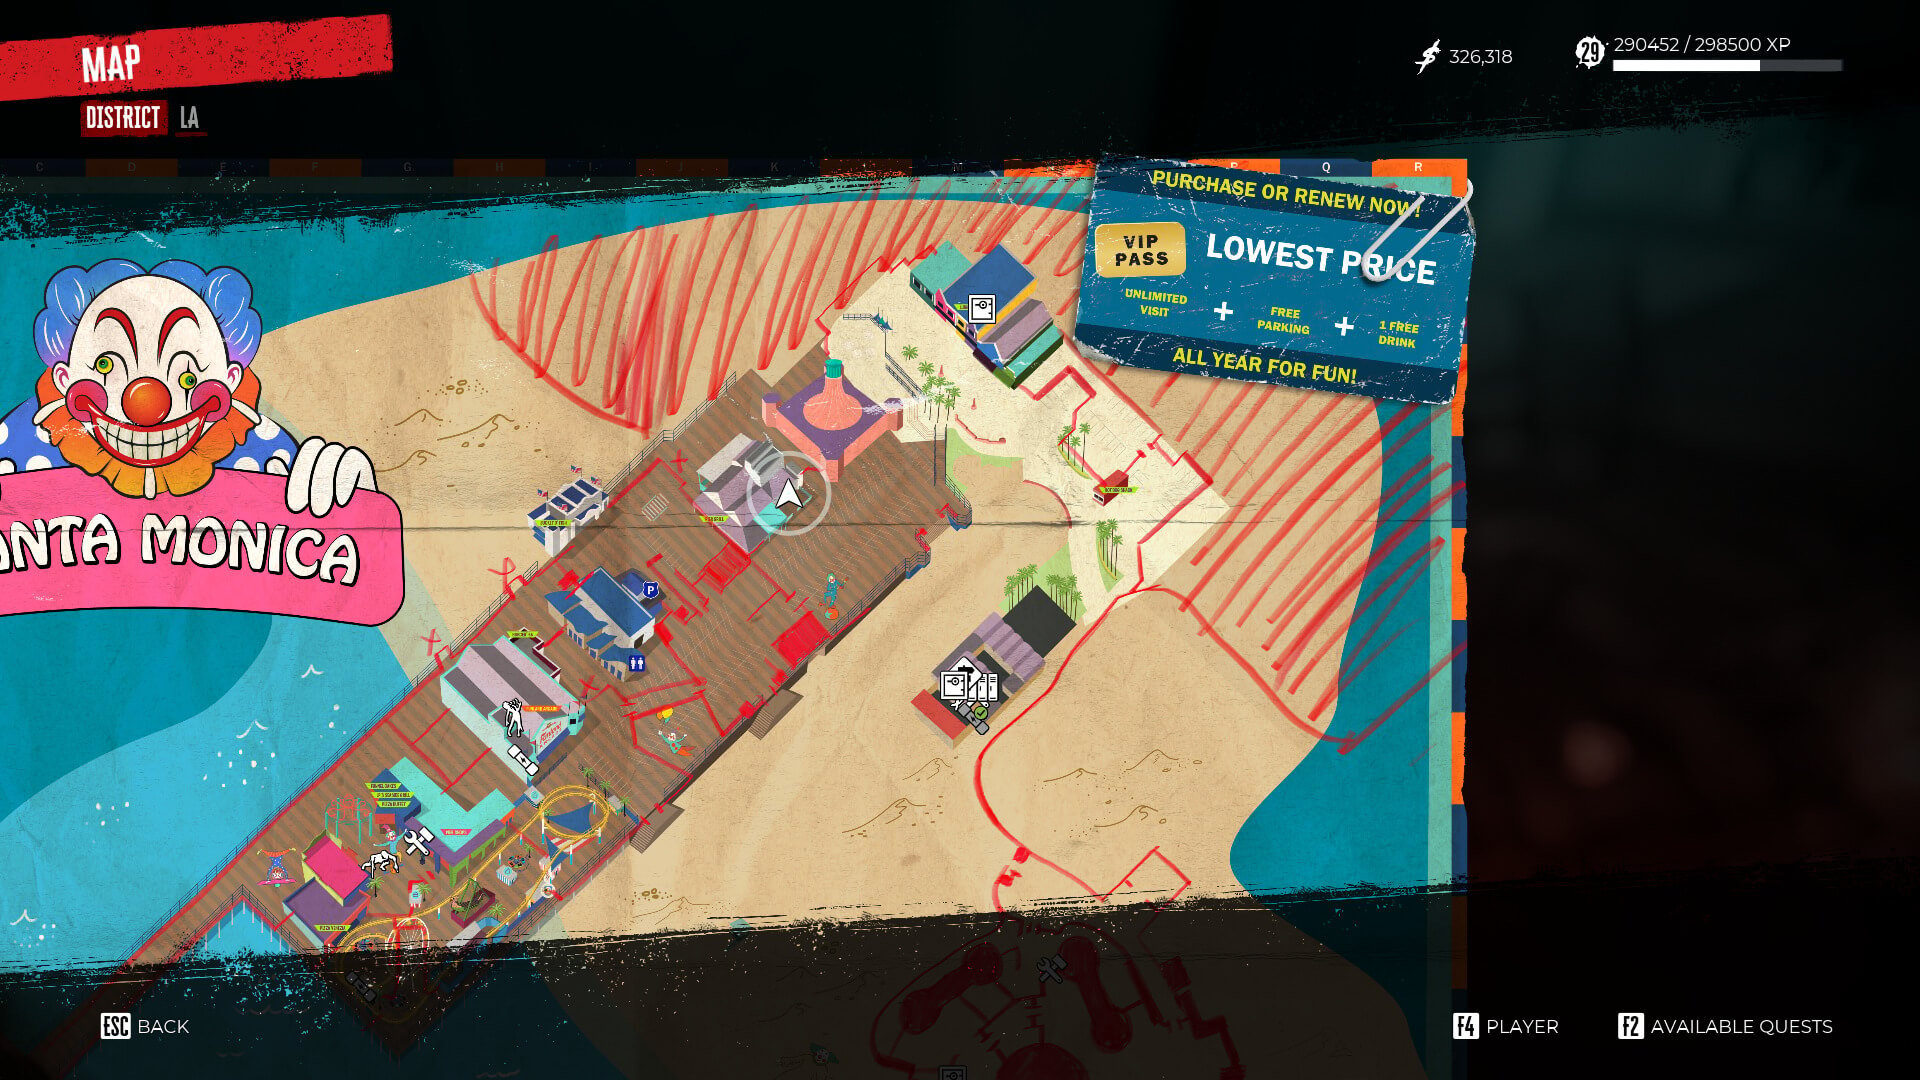 Map showing the location of Pier Grill in Dead Island 2.